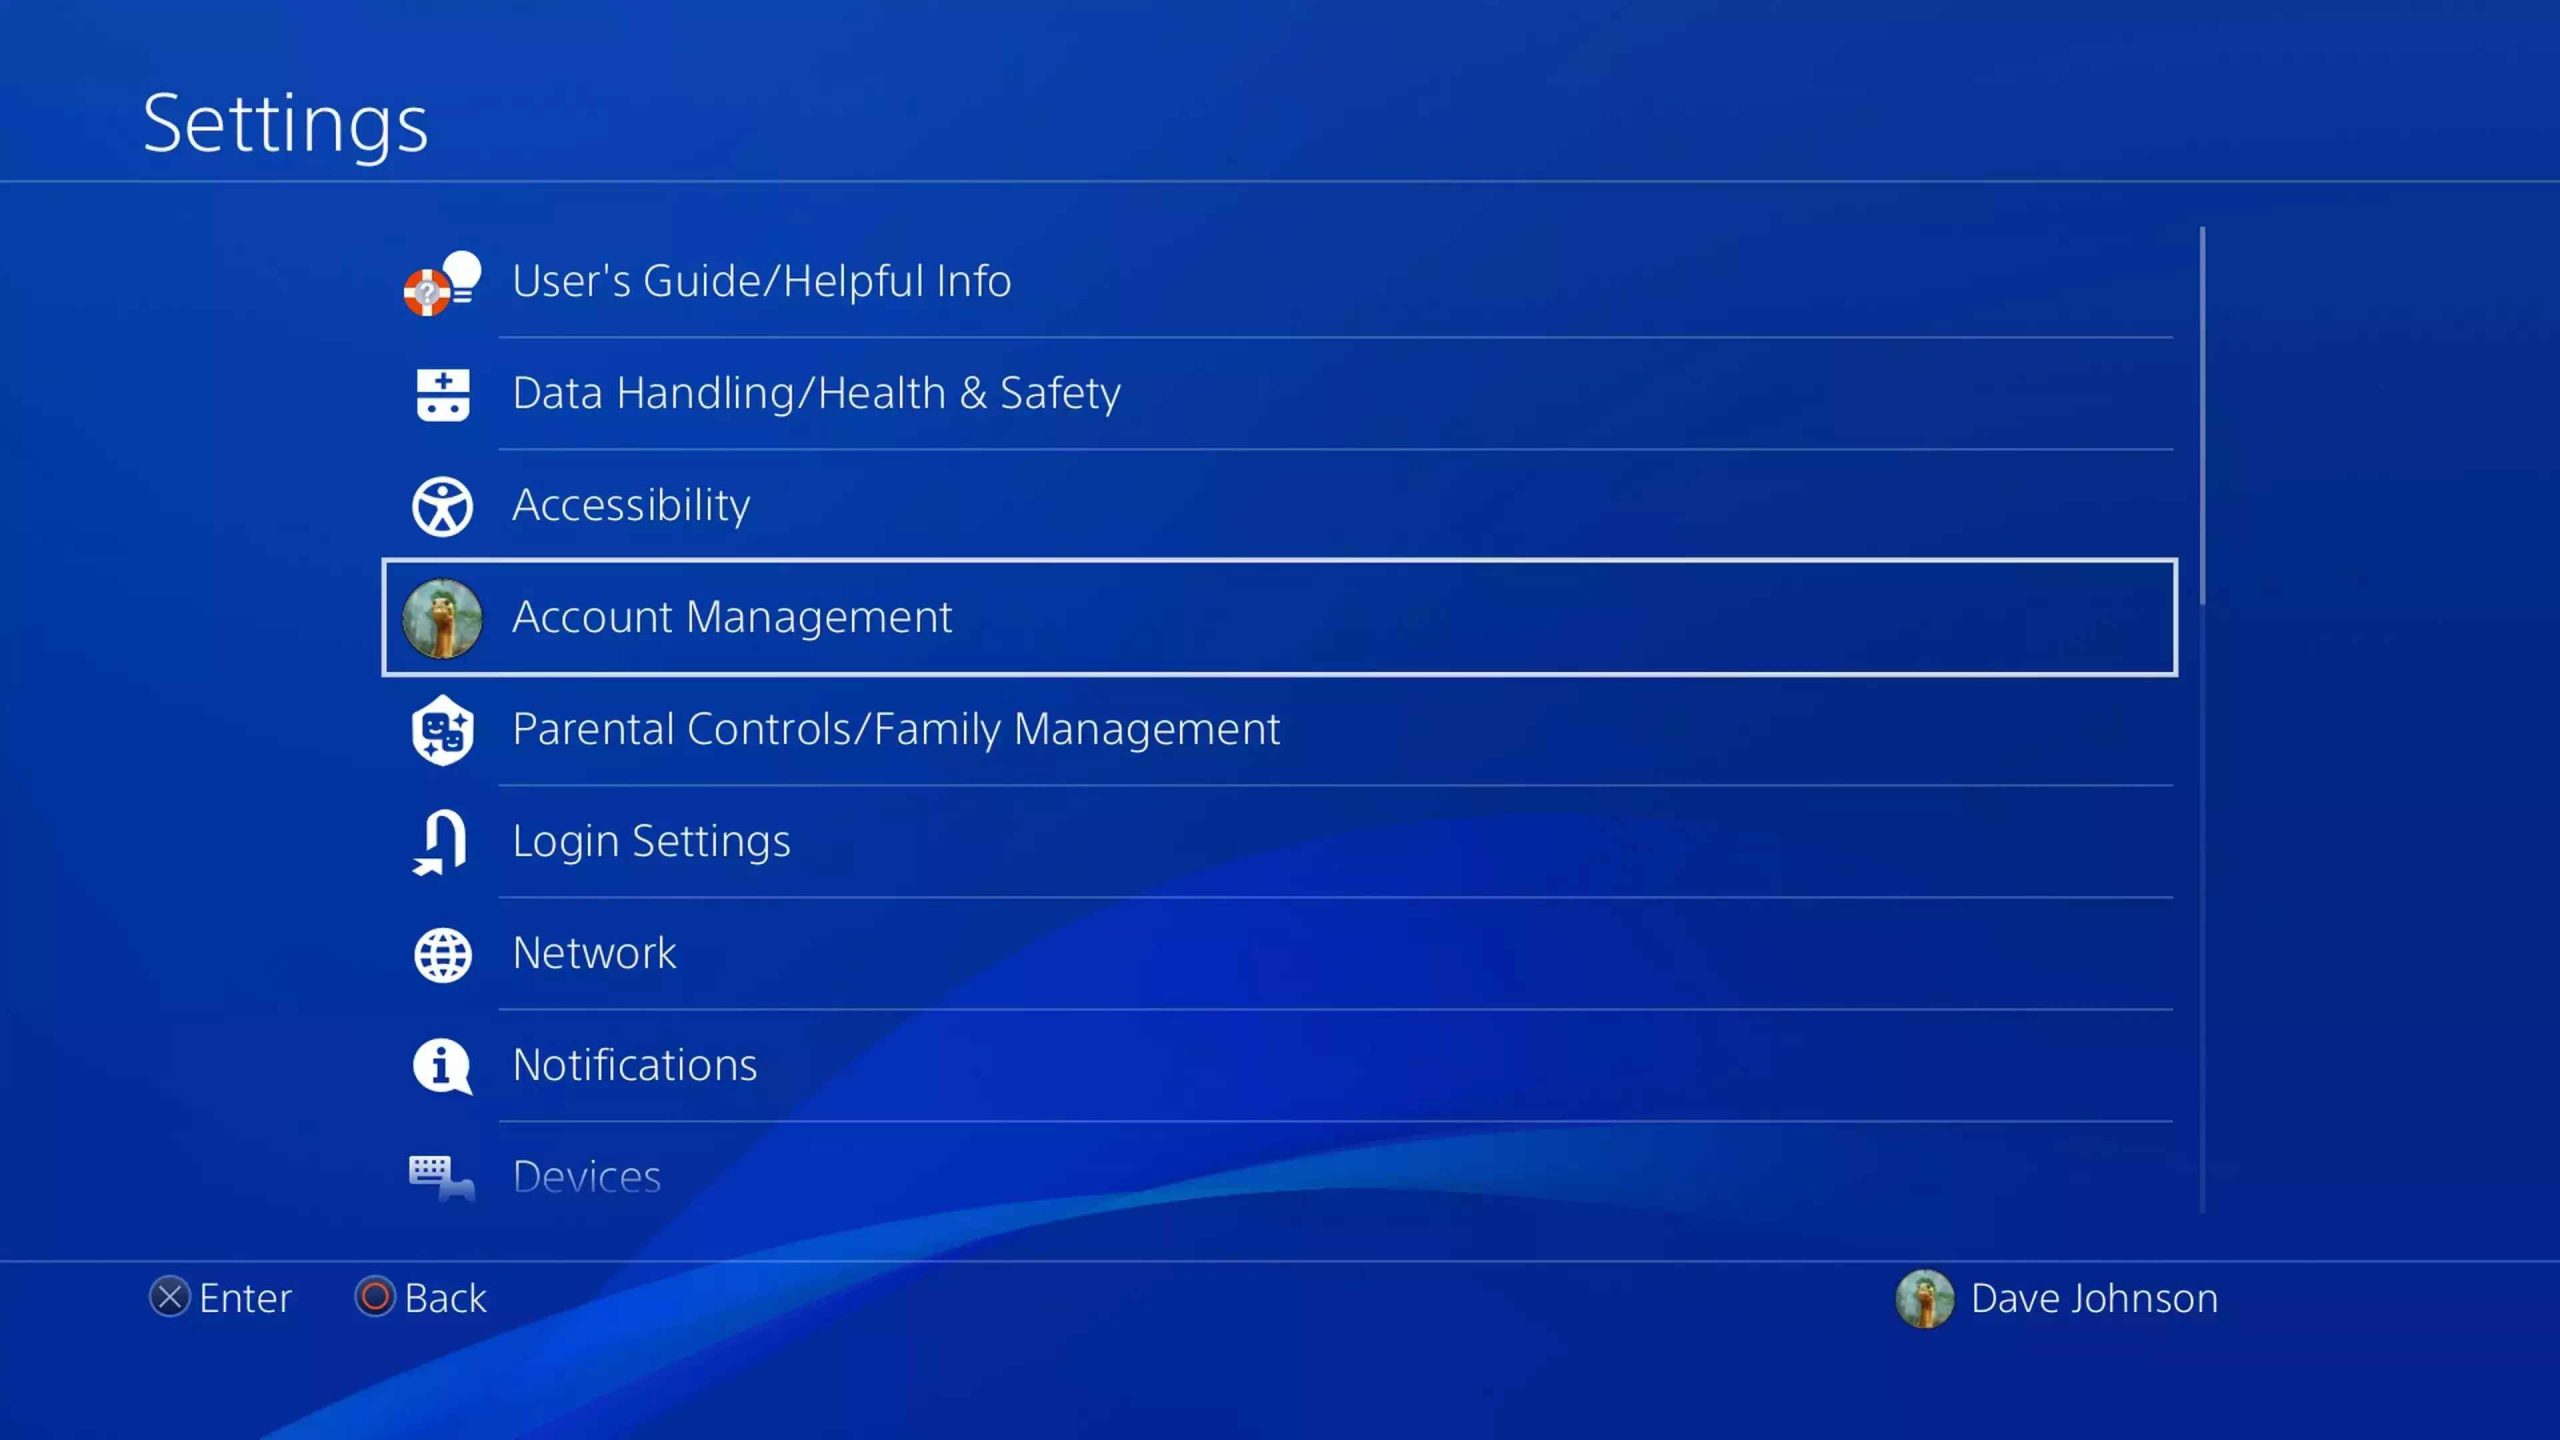 Settings menu to select account management to reset PS4 password